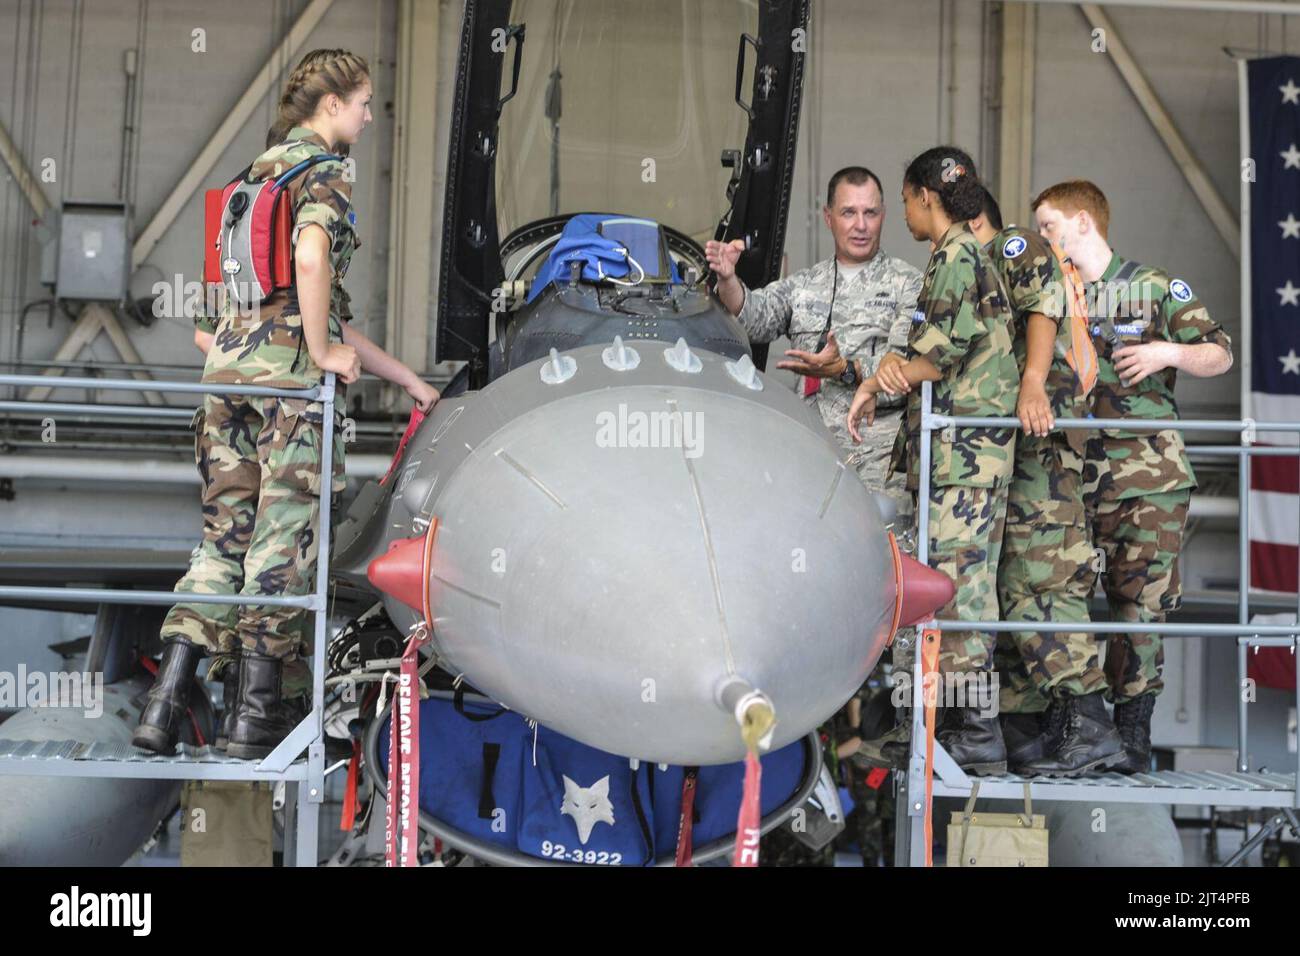 U.S. Air Force Tech. Sgt. gives an F-16 block 52 tour to Civil Air Patrol cadets from South and North Carolina. Stock Photo